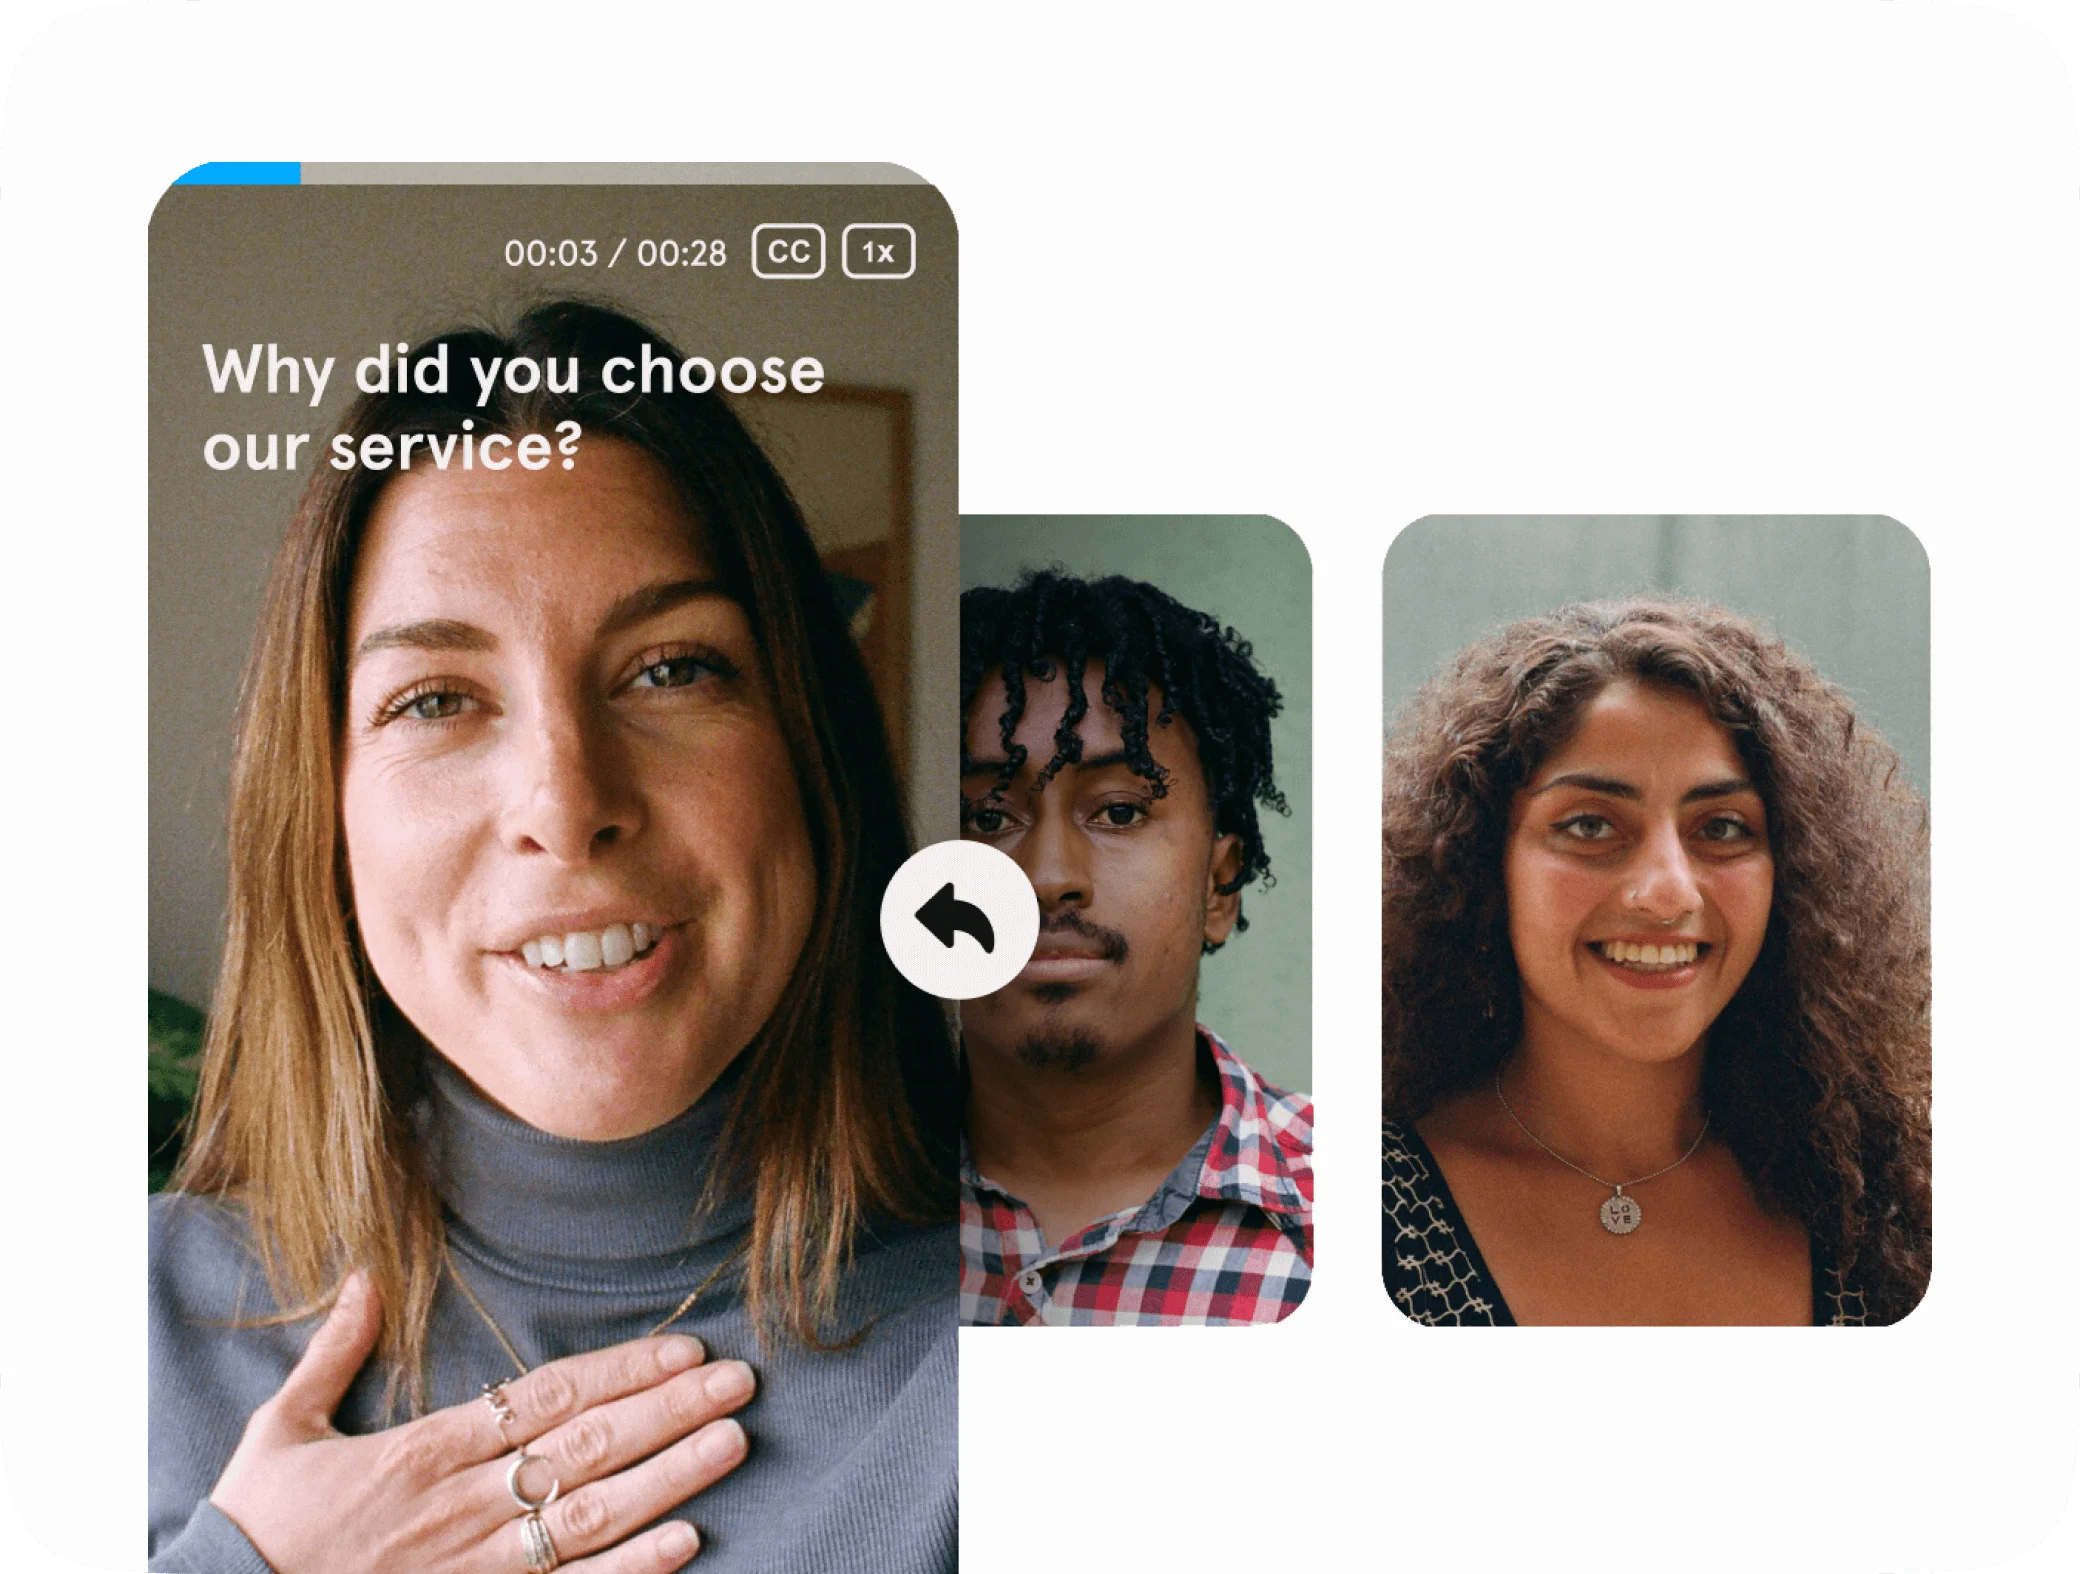 VideoAsk: Interact with video